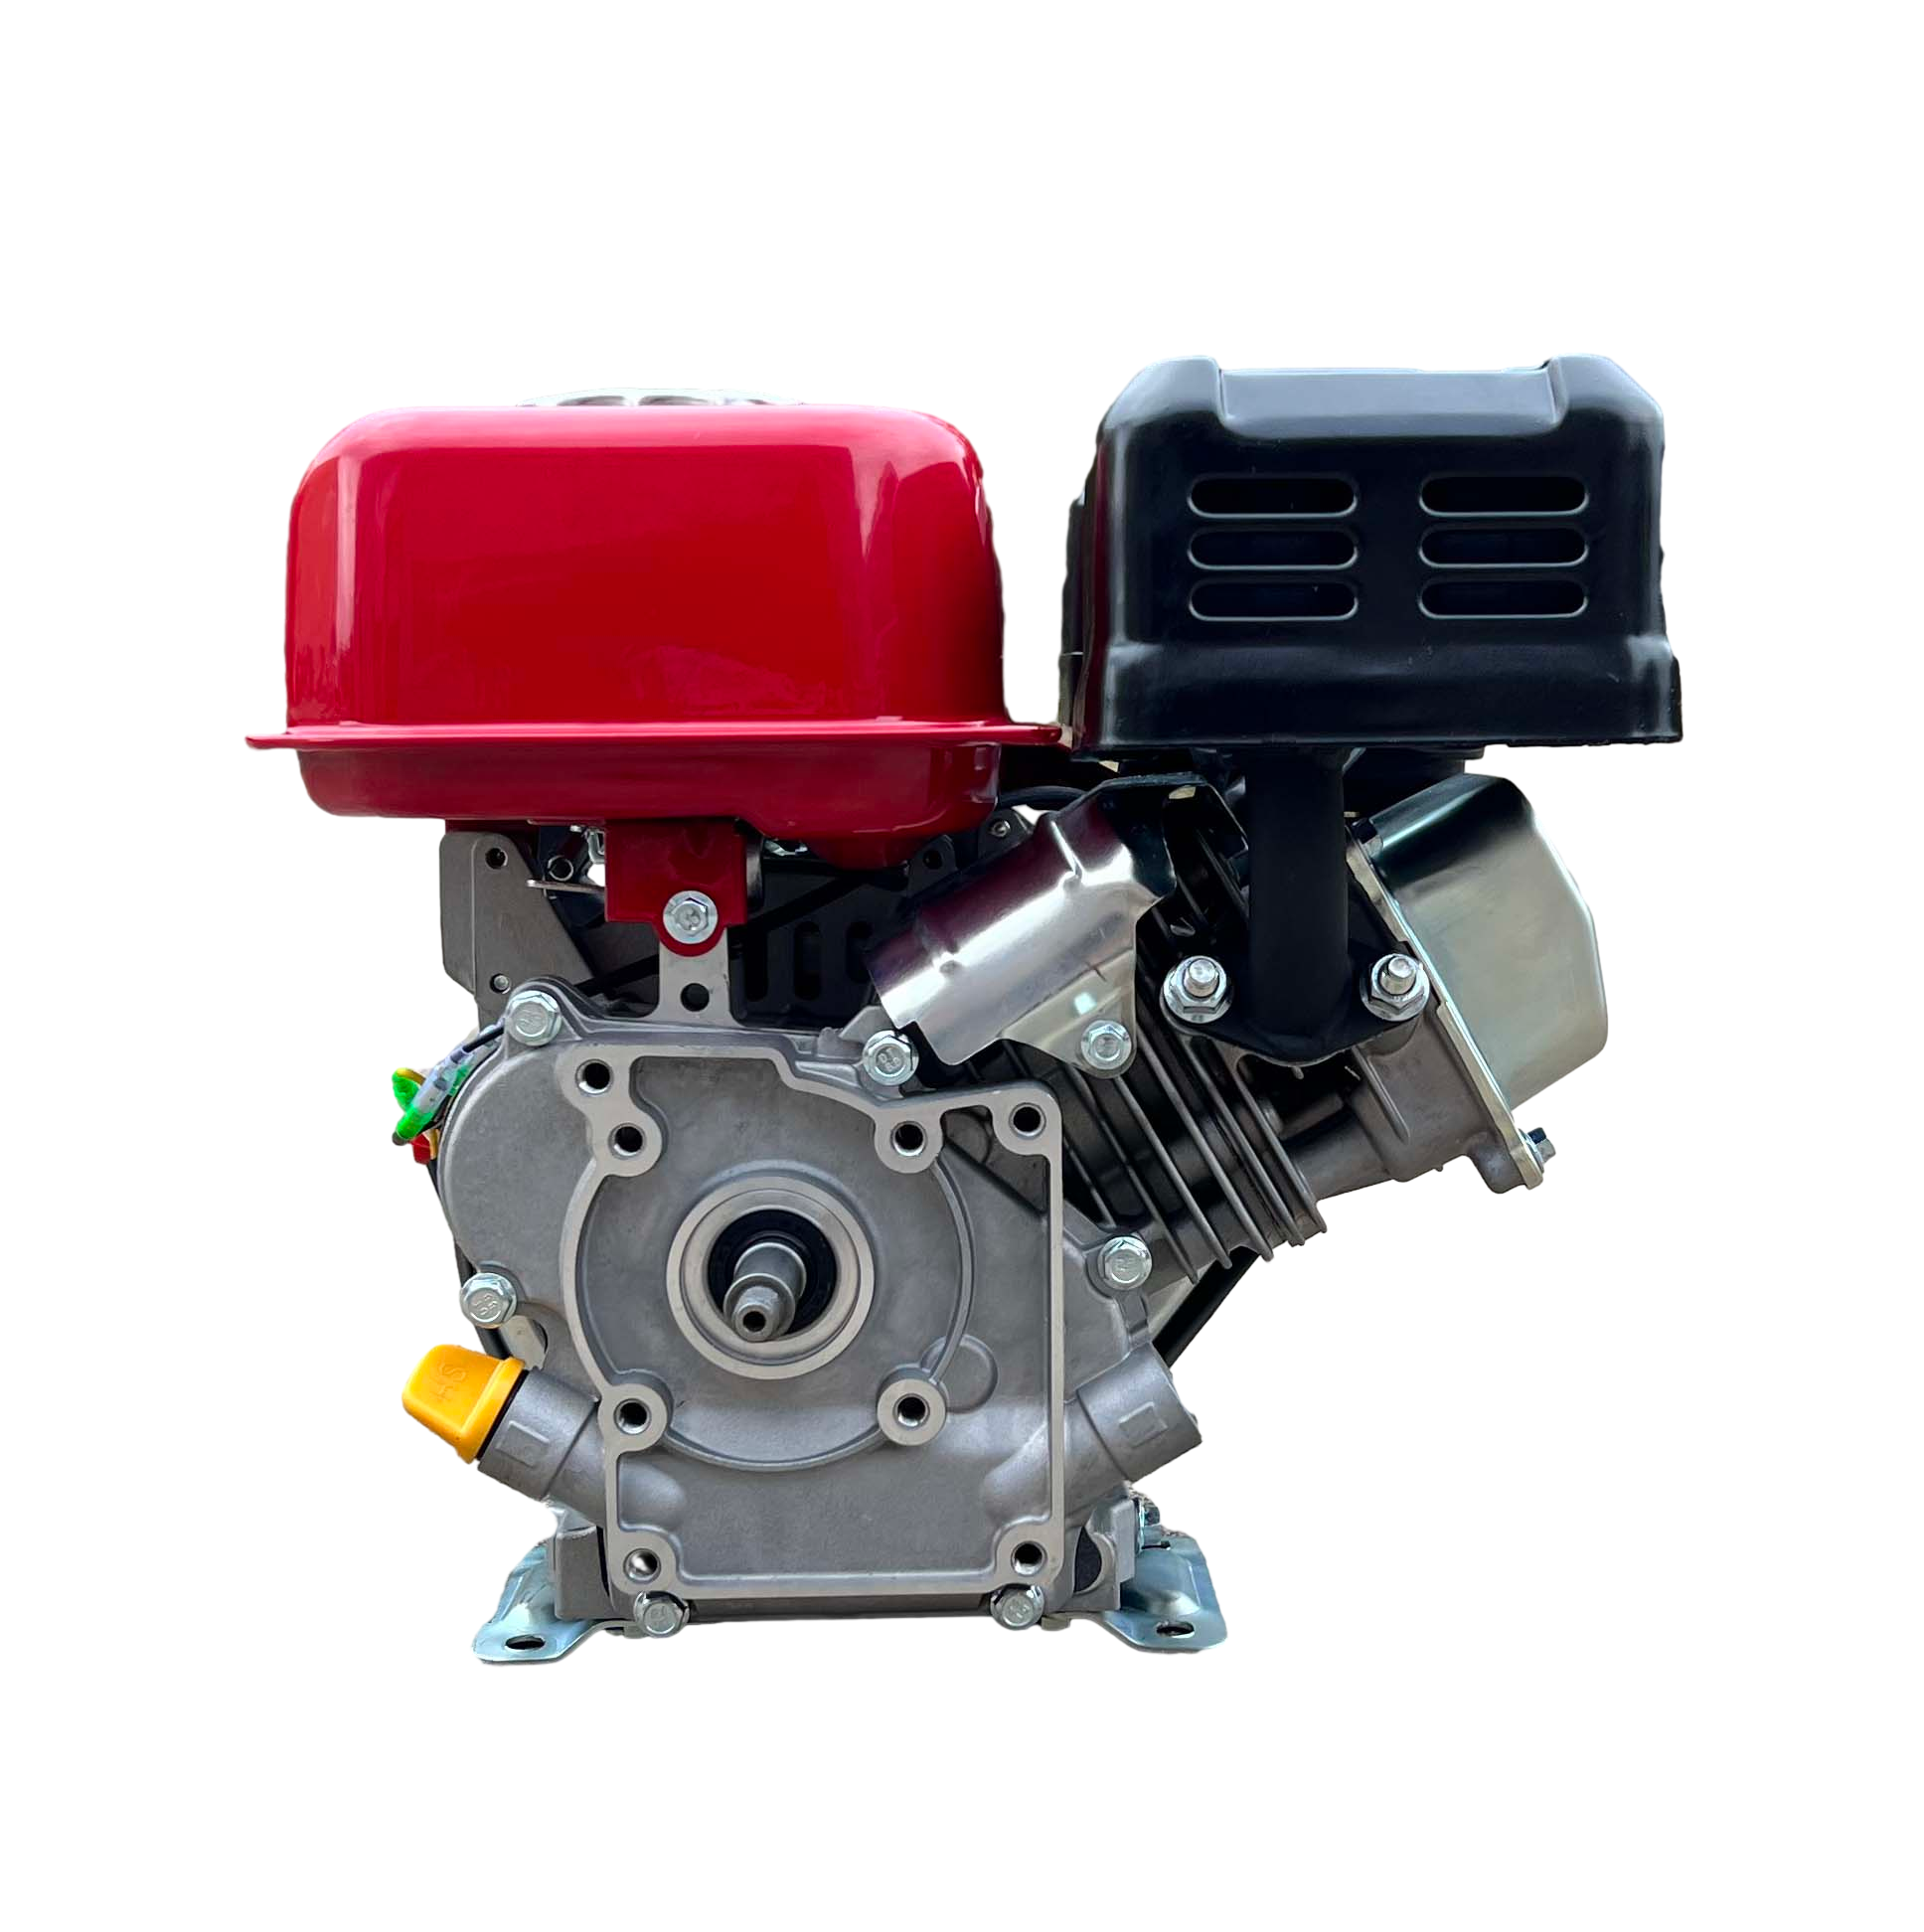 SLONG BRAND FUEL-EFFICIENT AIR COOLED 3HP GX80 PETROL ENGINE